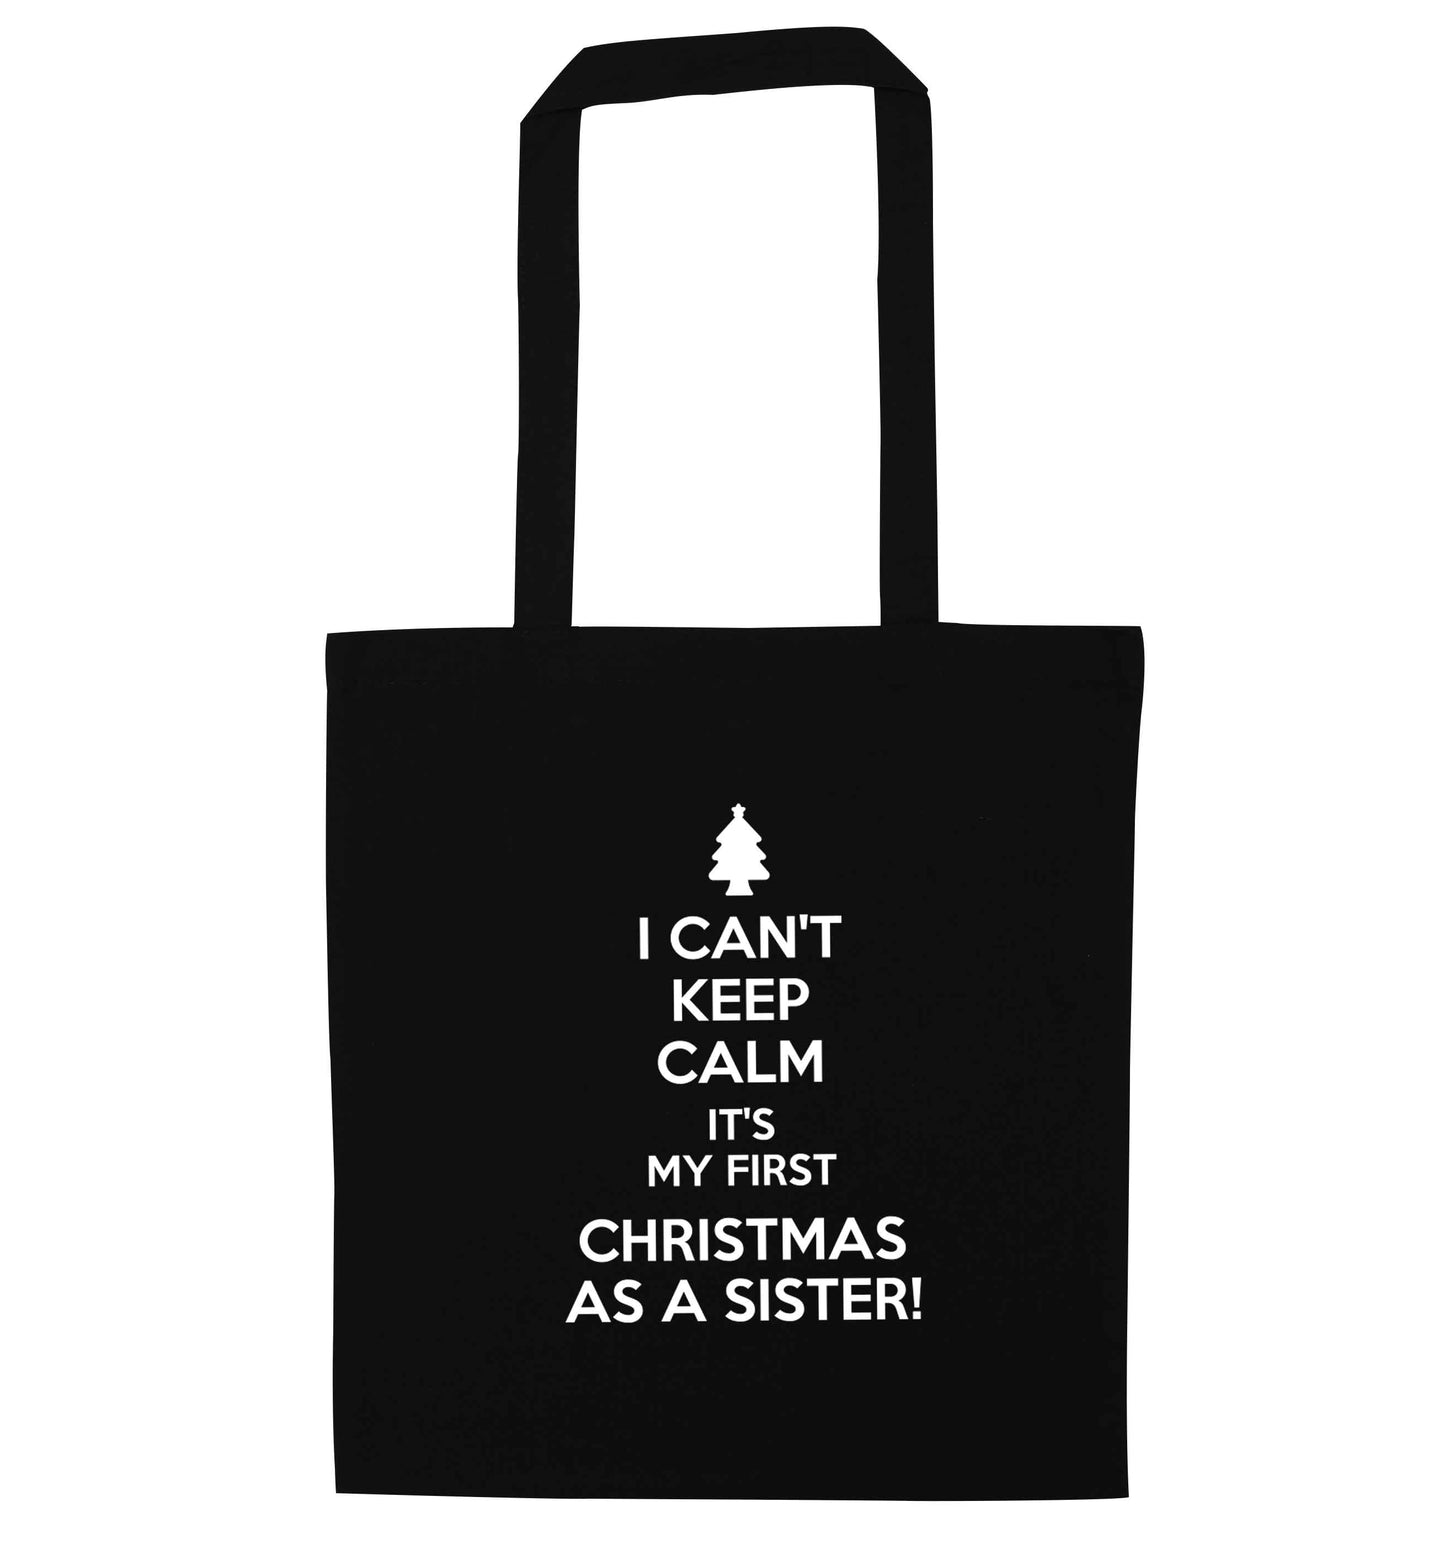 I can't keep calm it's my first Christmas as a sister! black tote bag